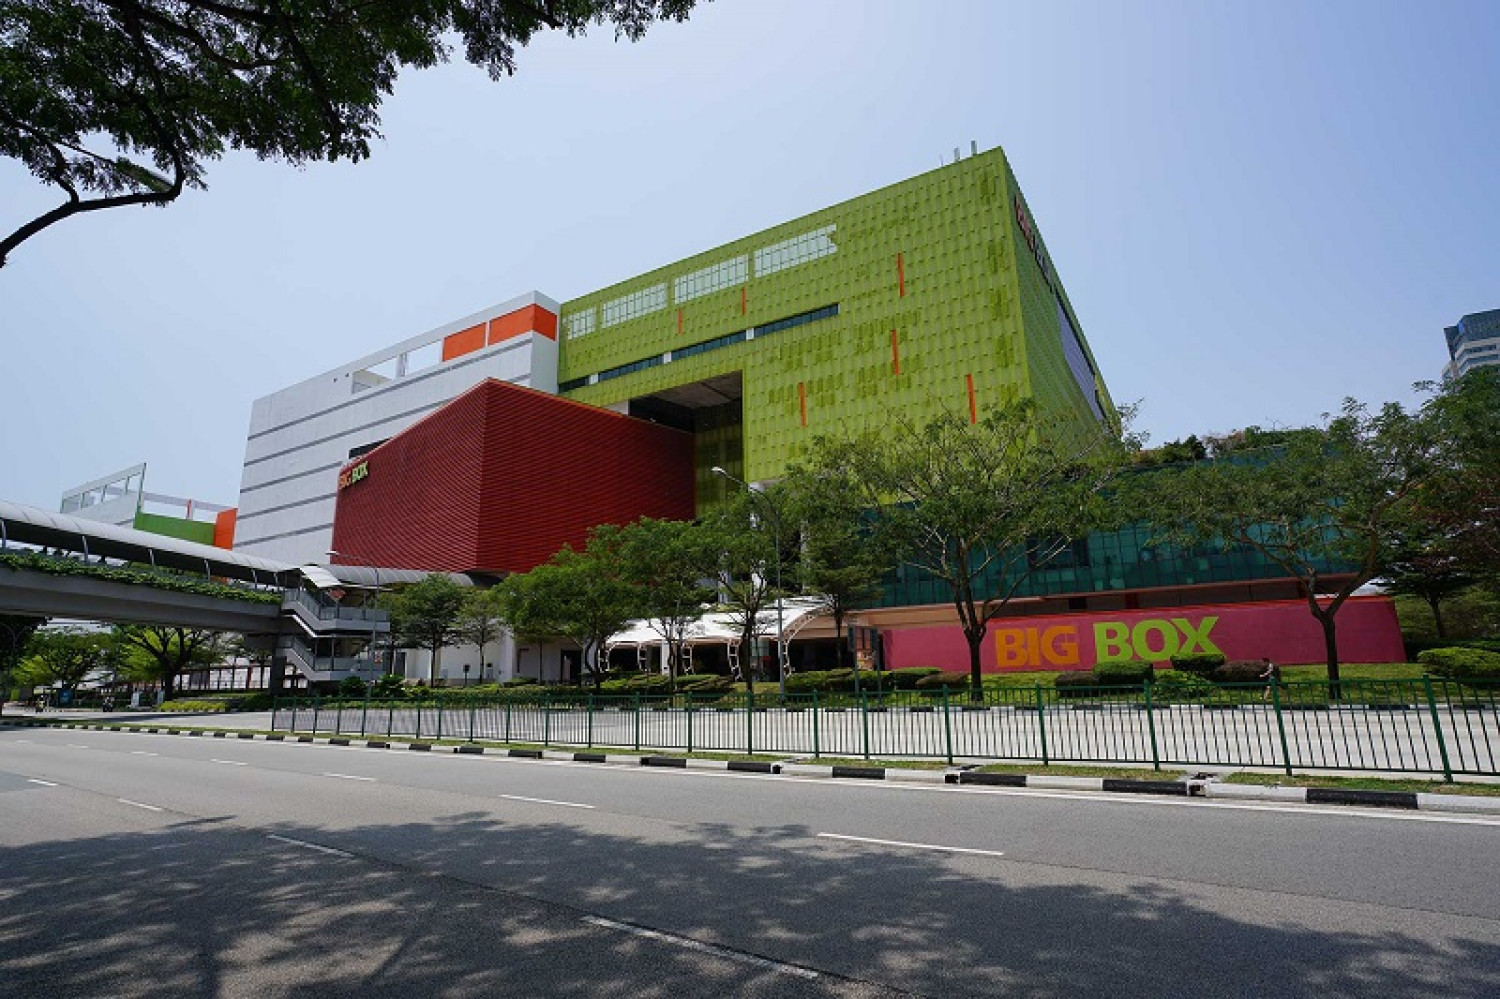 Big Box building in Jurong East put up for sale by managers - Property News